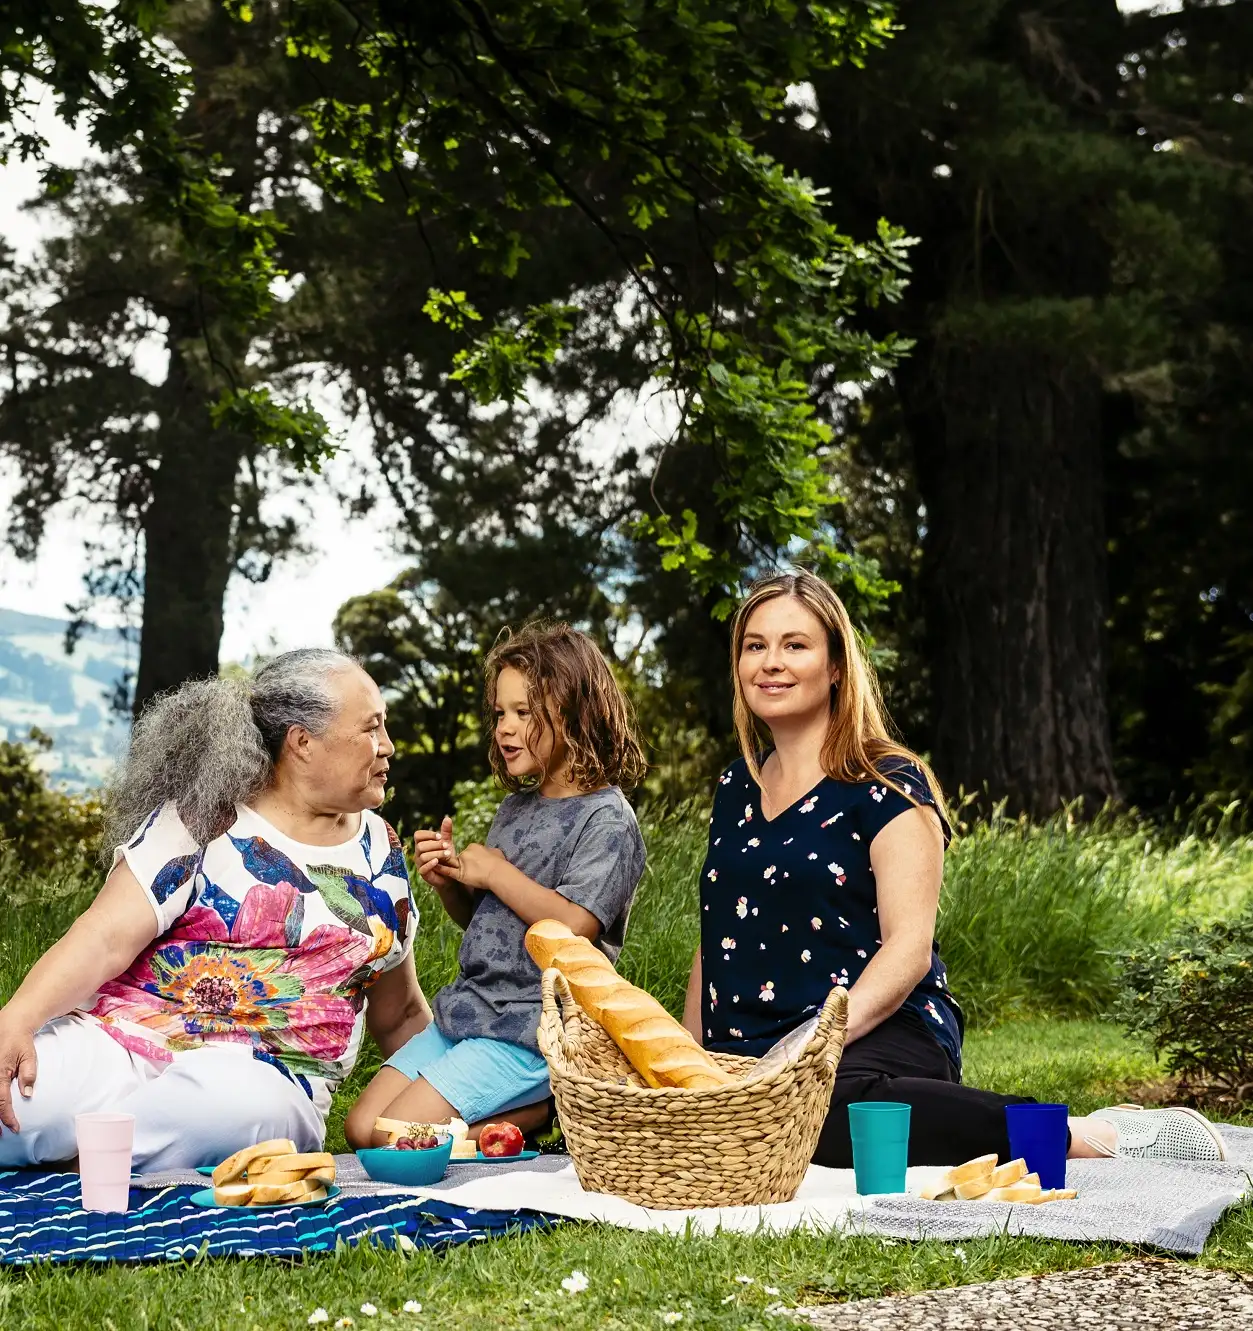 Grandmother, grandson and daughter having a picnic